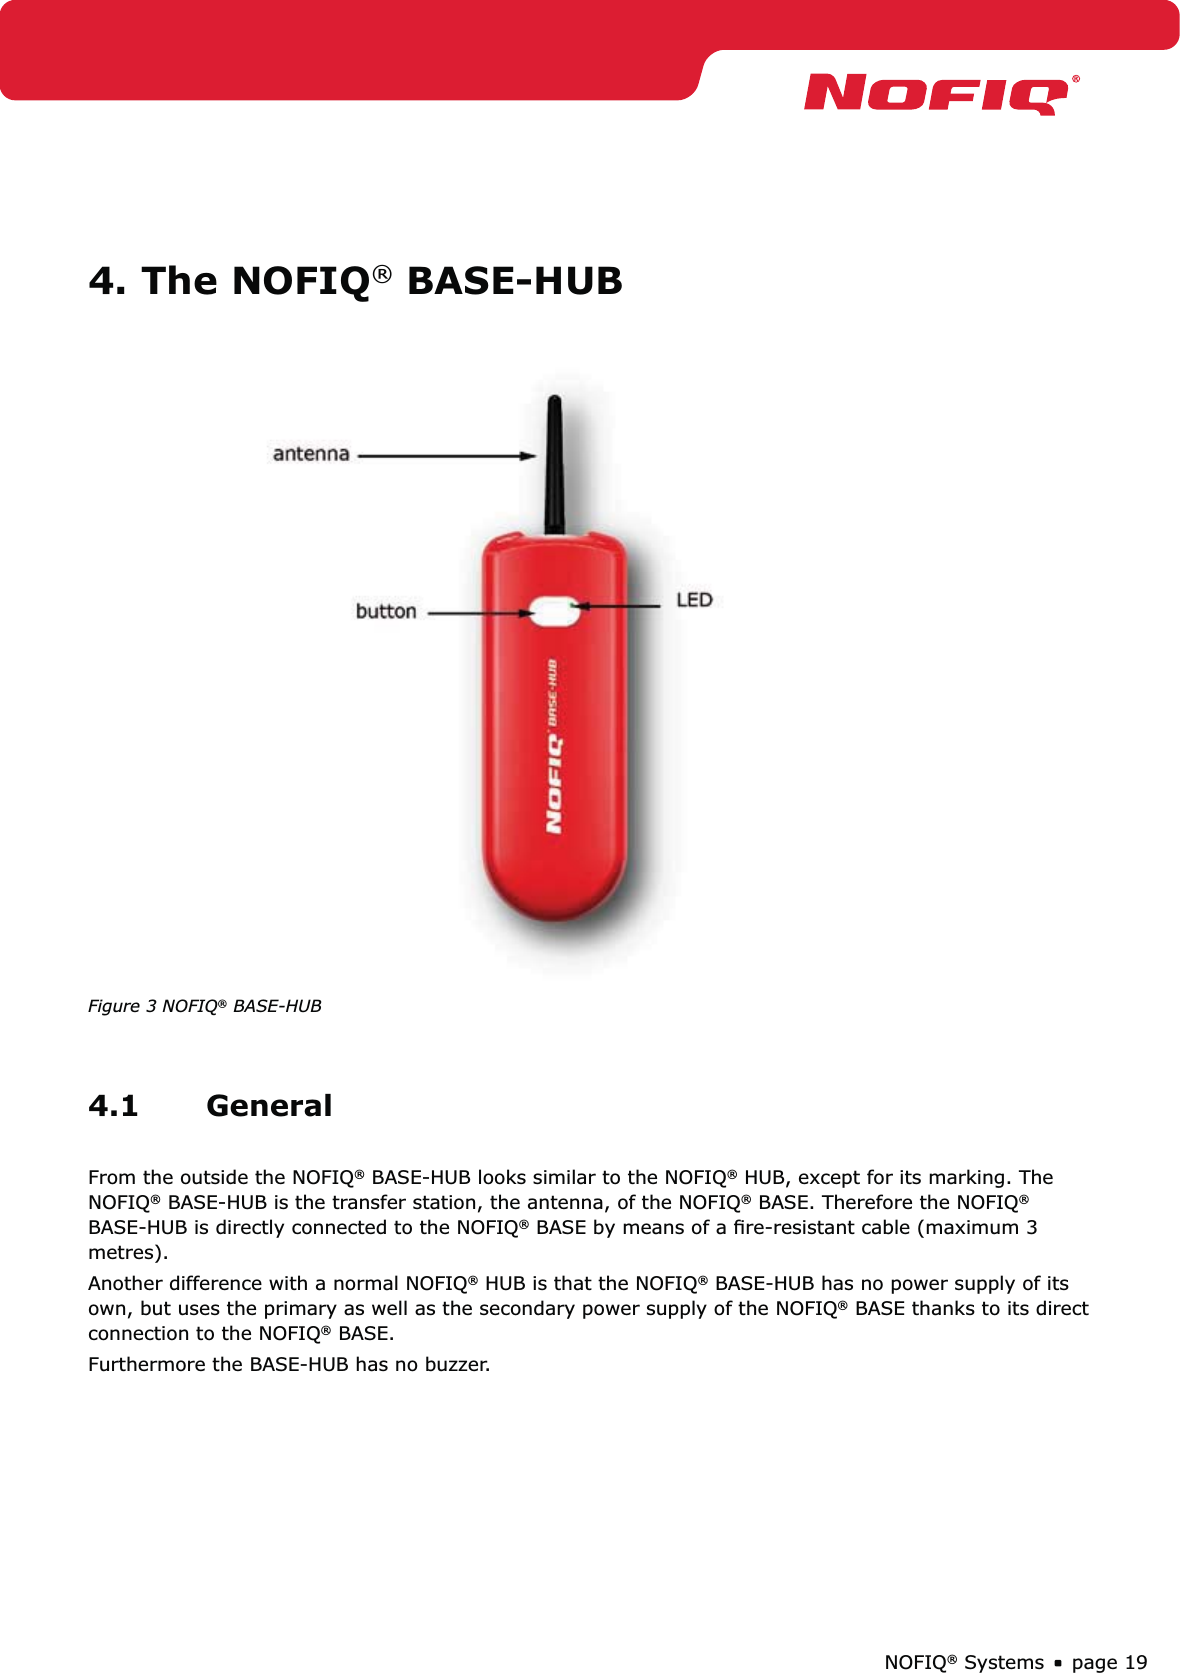 page 19NOFIQ® Systems4. The NOFIQ® BASE-HUBFigure 3 NOFIQ® BASE-HUB4.1 GeneralFrom the outside the NOFIQ® BASE-HUB looks similar to the NOFIQ® HUB, except for its marking. The NOFIQ® BASE-HUB is the transfer station, the antenna, of the NOFIQ® BASE. Therefore the NOFIQ® BASE-HUB is directly connected to the NOFIQ® BASE by means of a ﬁre-resistant cable (maximum 3 metres).Another difference with a normal NOFIQ® HUB is that the NOFIQ® BASE-HUB has no power supply of its own, but uses the primary as well as the secondary power supply of the NOFIQ® BASE thanks to its direct connection to the NOFIQ® BASE.Furthermore the BASE-HUB has no buzzer.